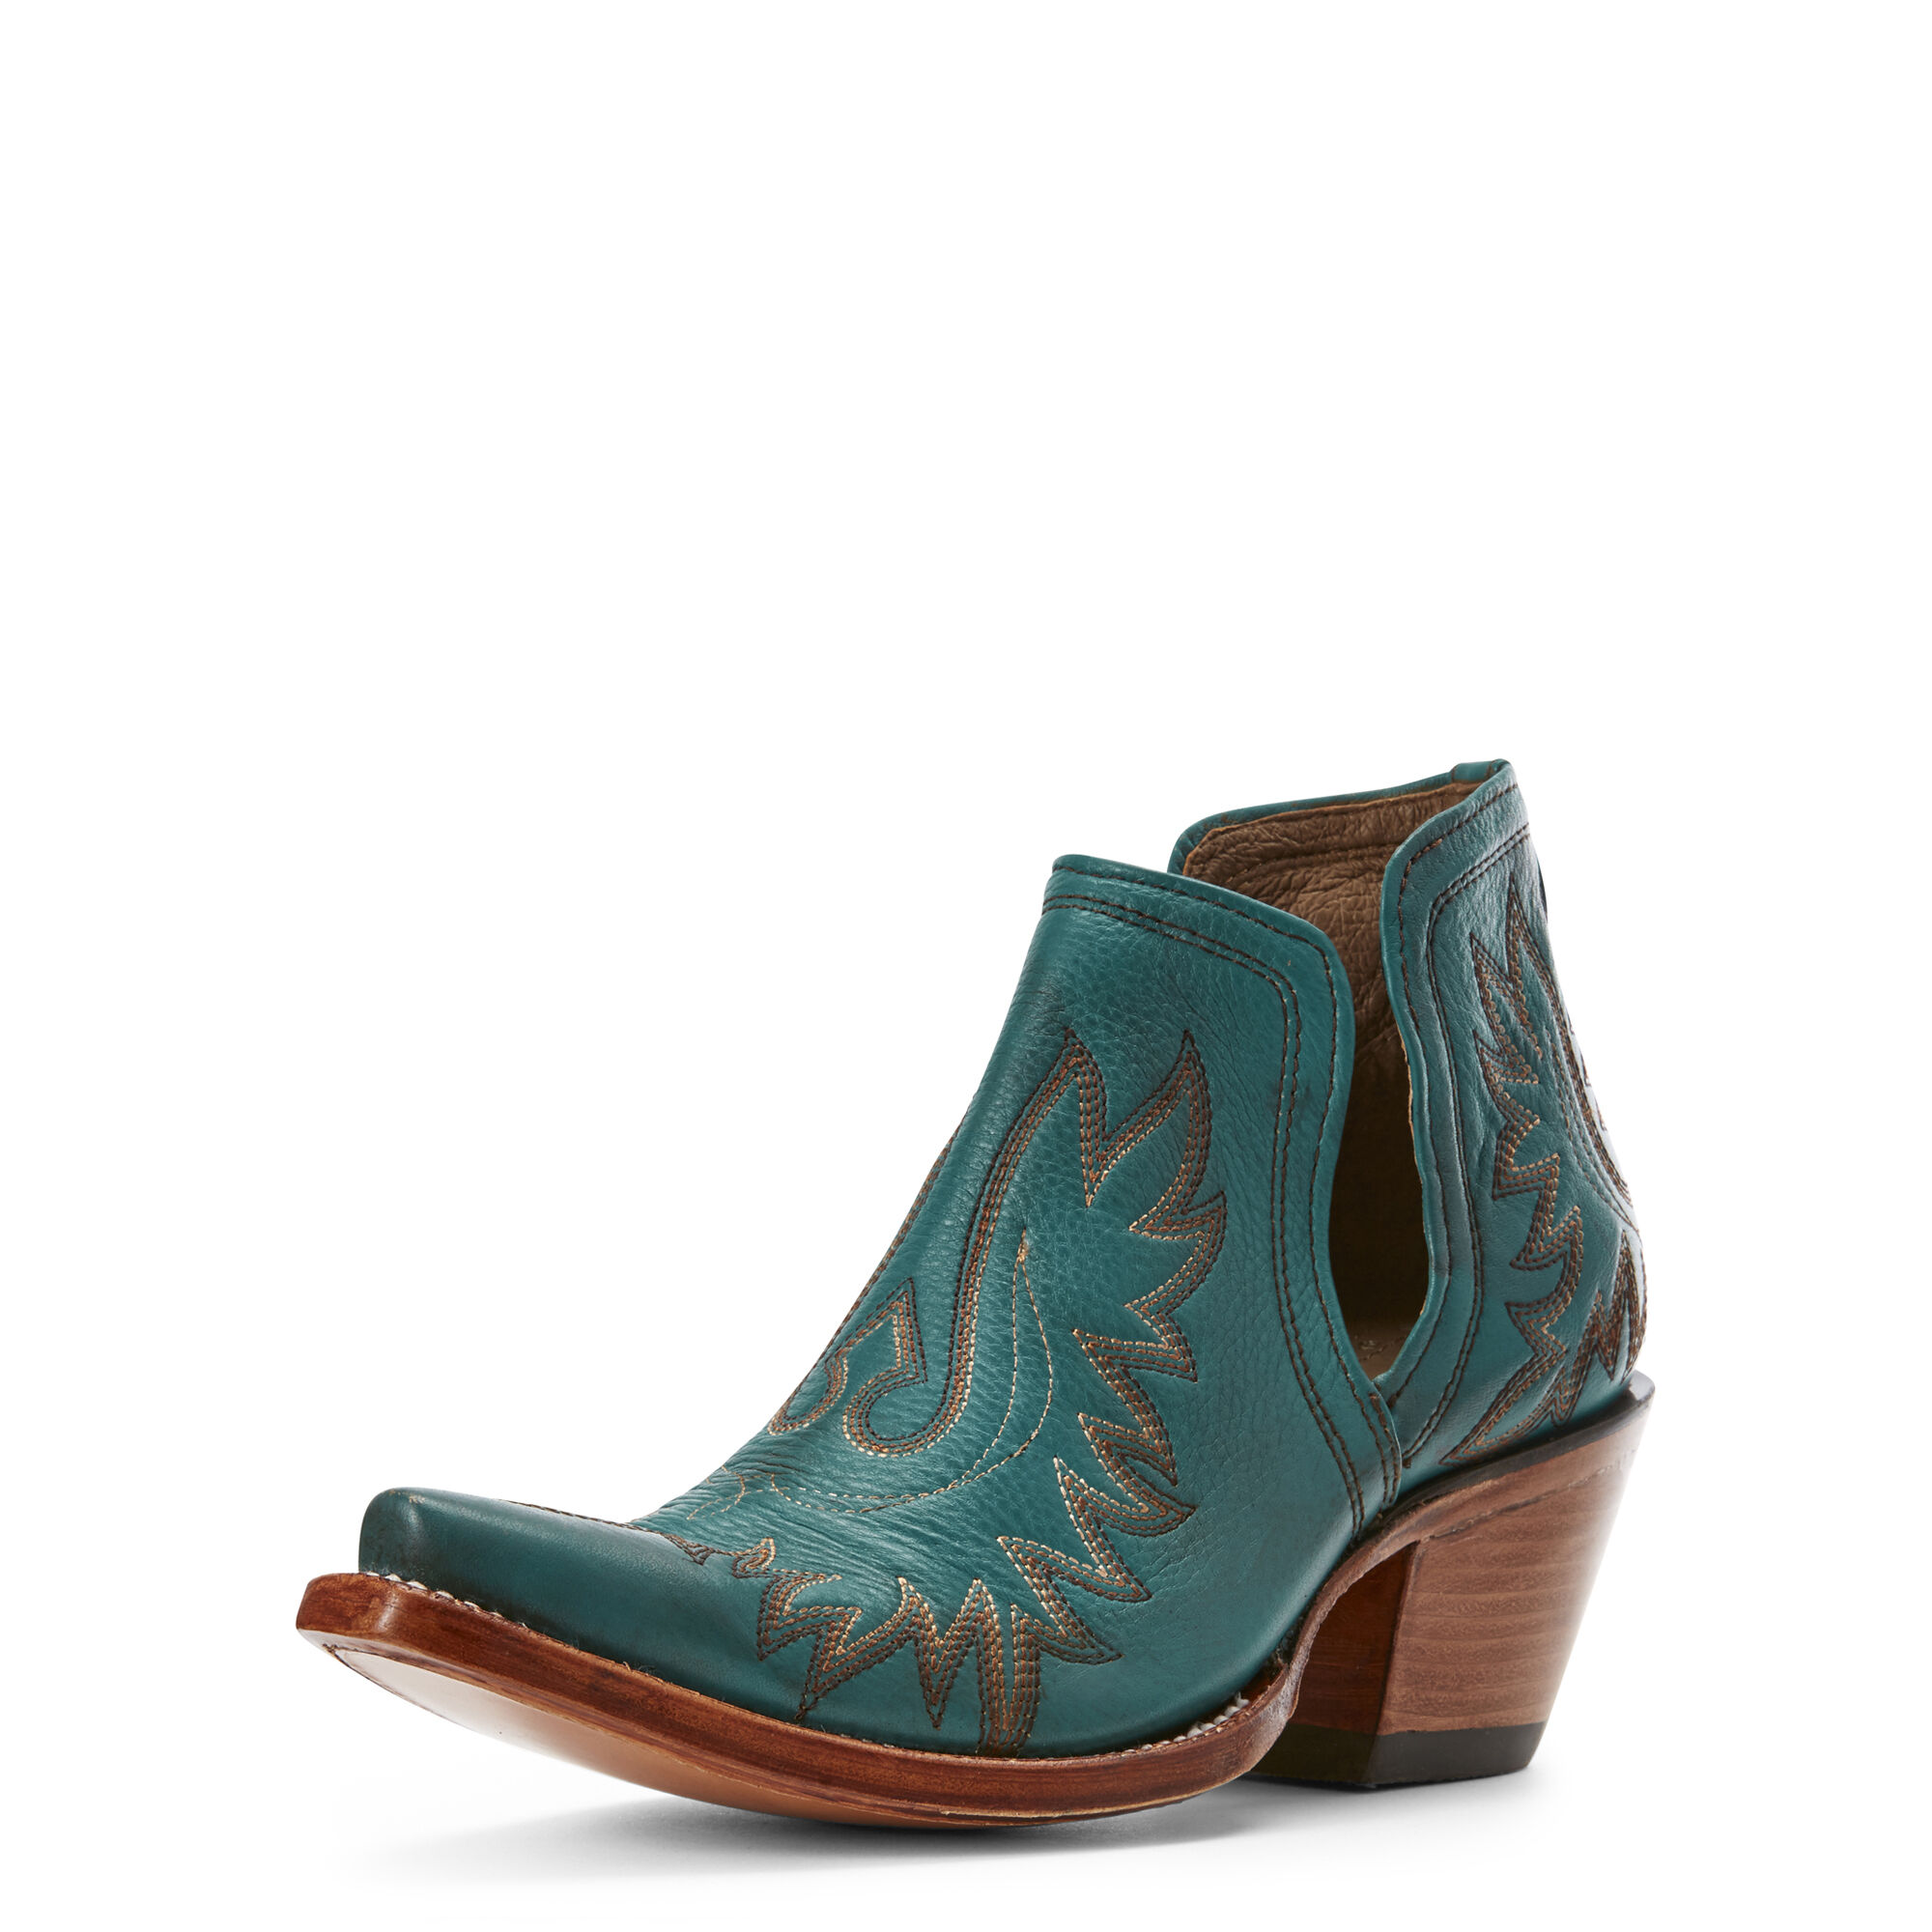 Women's Dixon Western Boots in Agate Green Leather  by Ariat